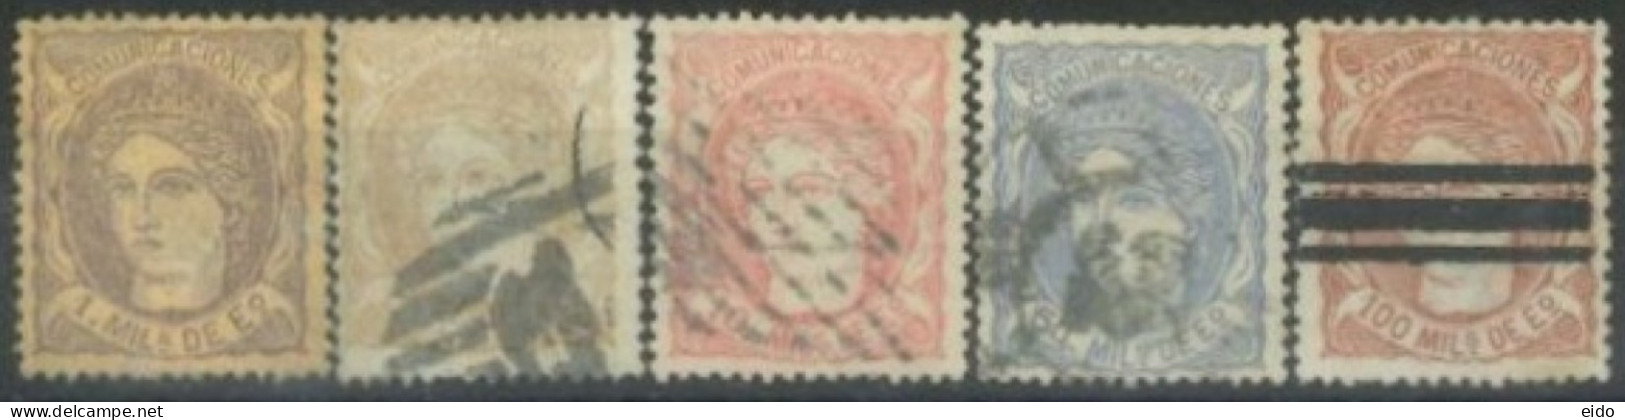 SPAIN,  1870 - ESPANA STAMPS SET OF 5, # 159, 163/64, & 166/67,USED. - Used Stamps